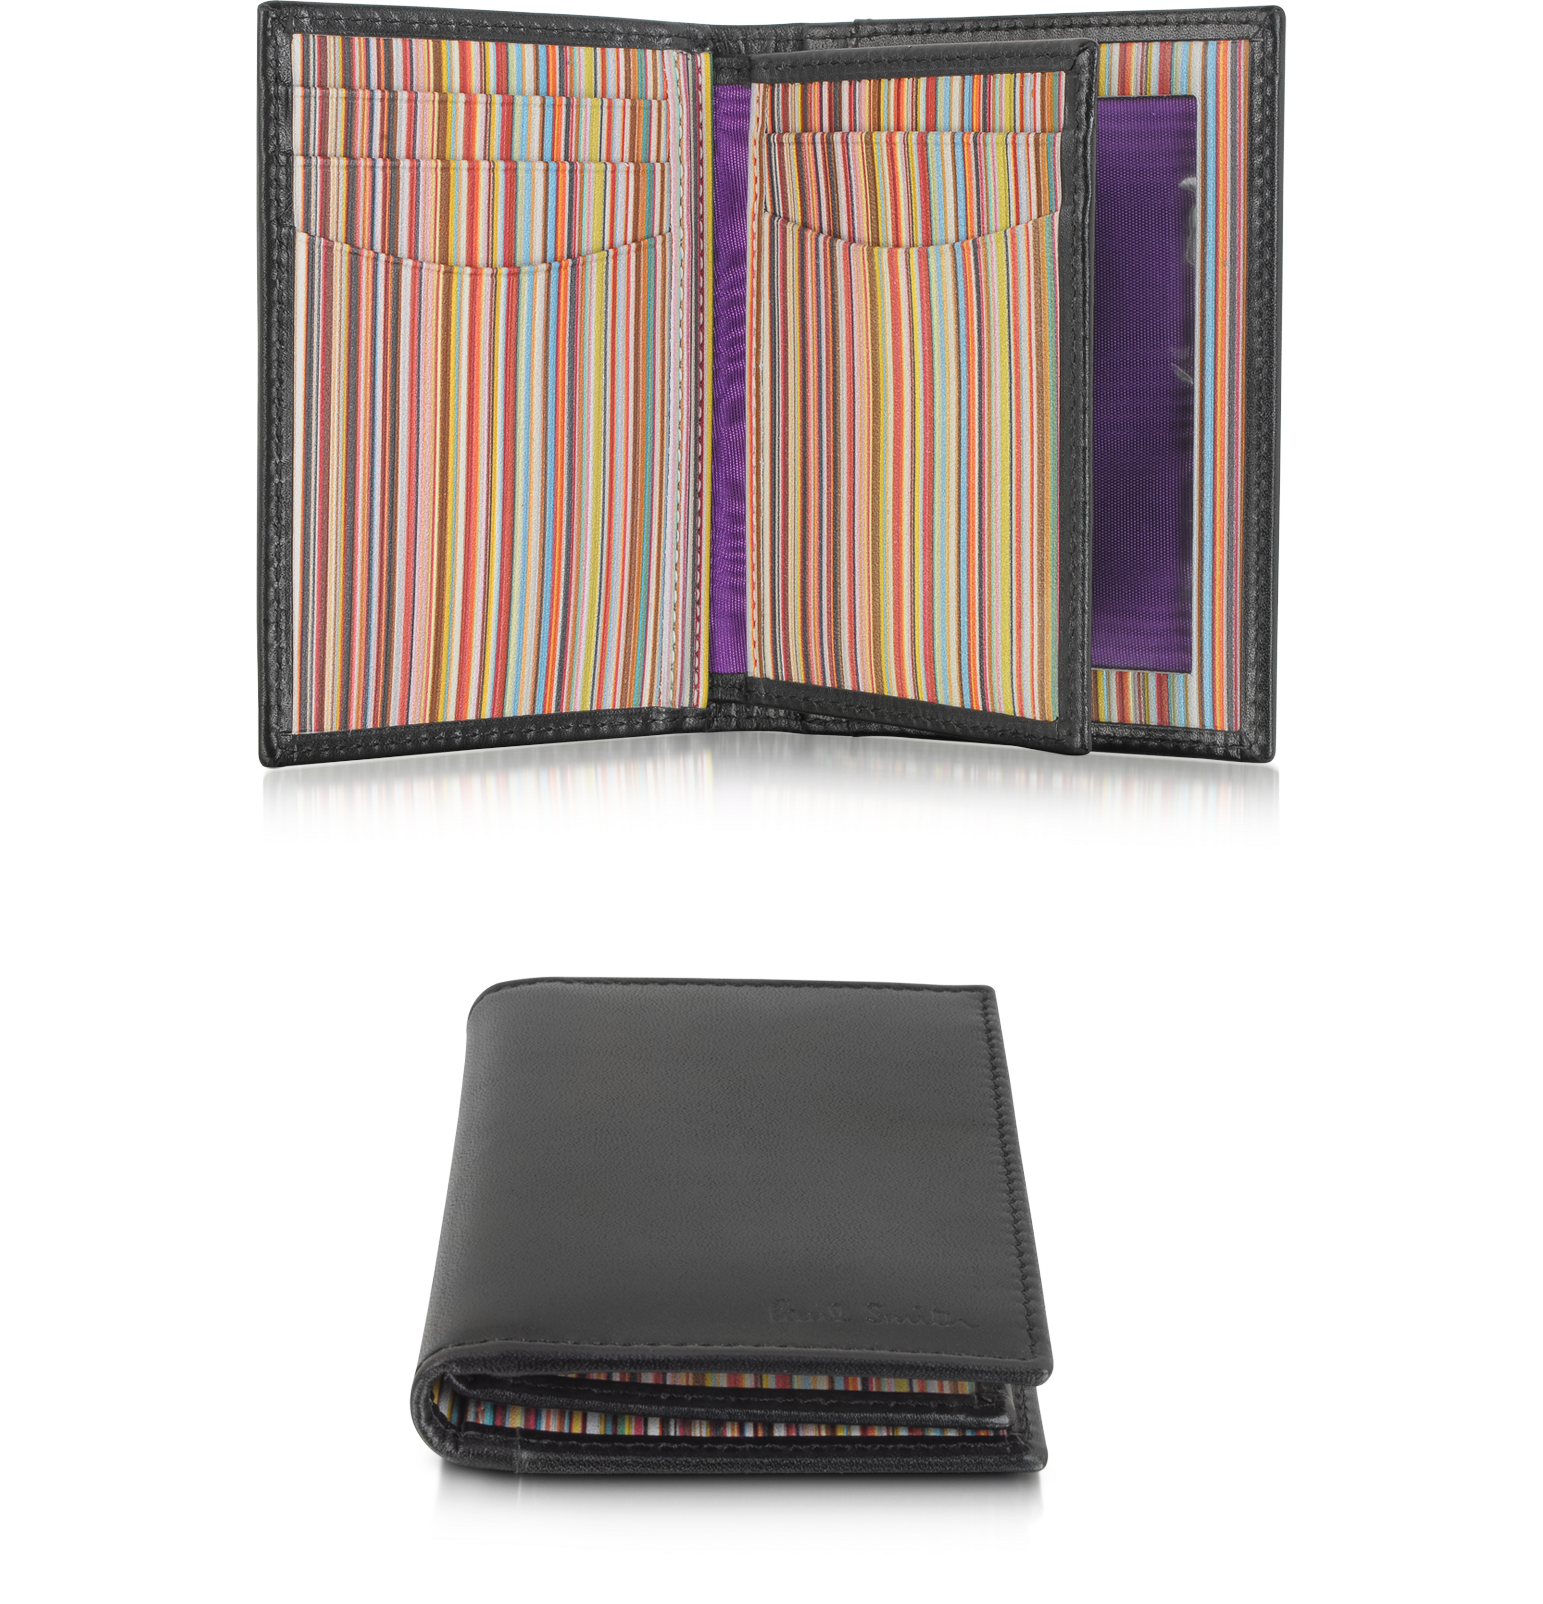 Paul Smith Black Leather N/S Travel Wallet at FORZIERI